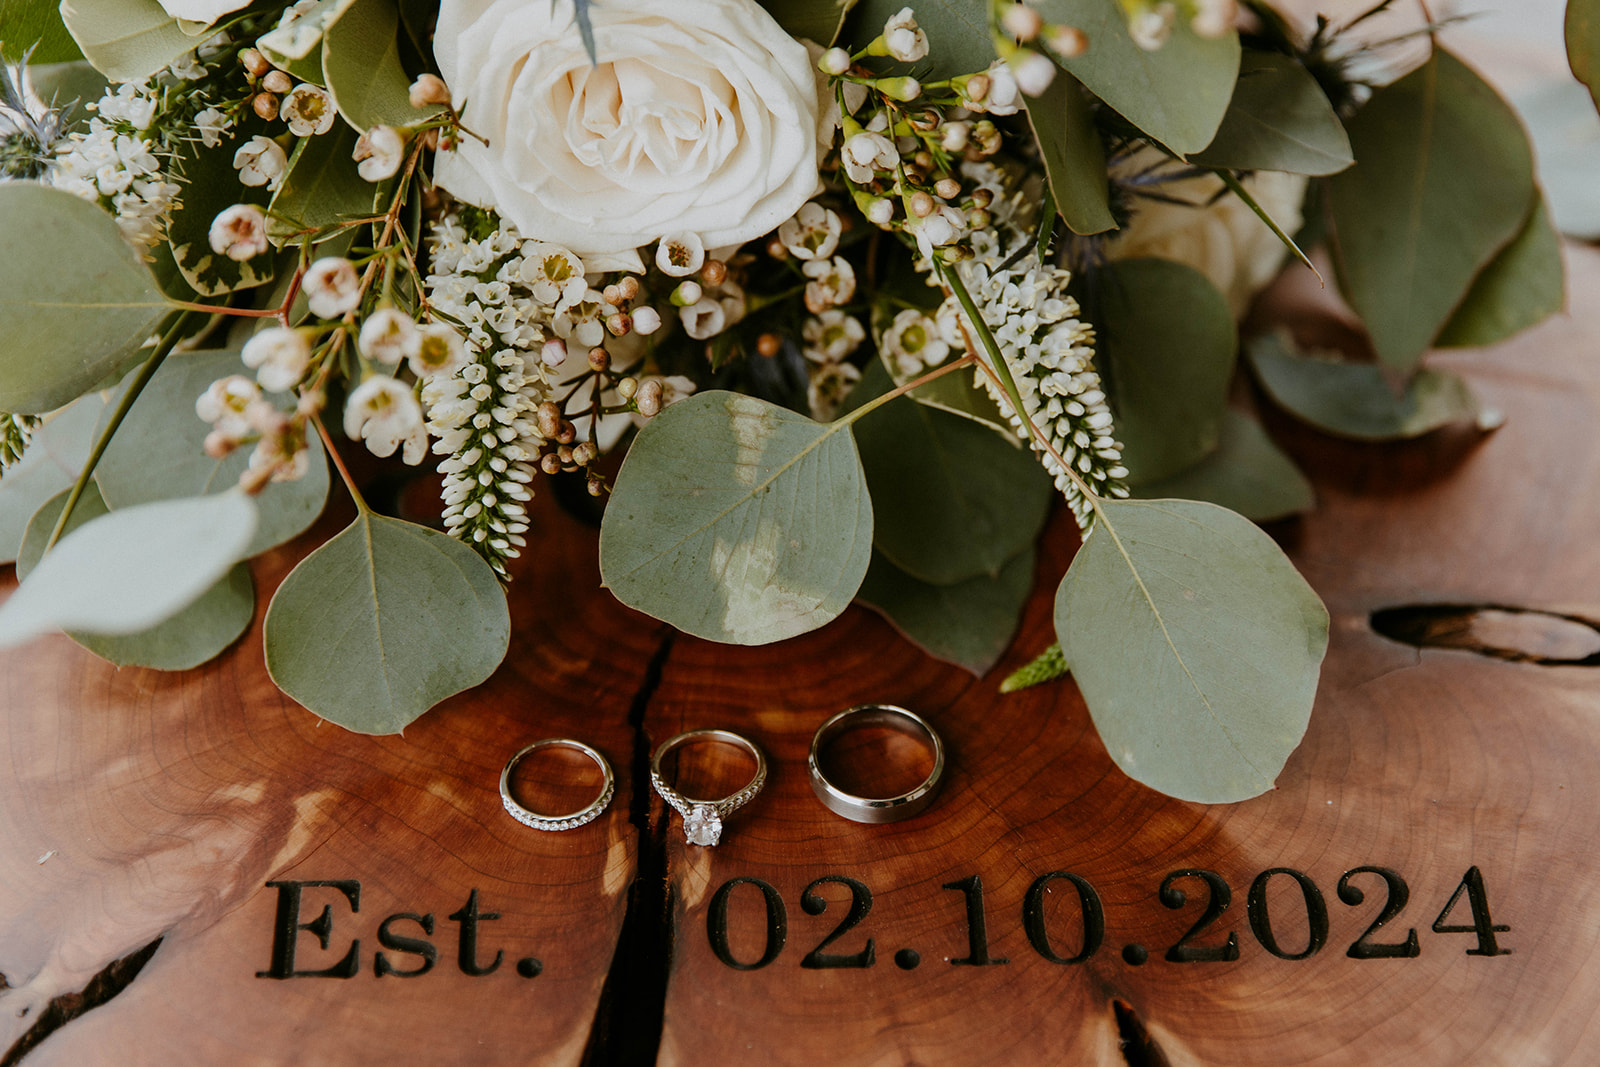 Close-up of three rings on a wooden surface with a bouquet of white flowers and green foliage. The text "Est. 02.10.2024" is printed below the rings at a wedding at the venues at ogeechee tech